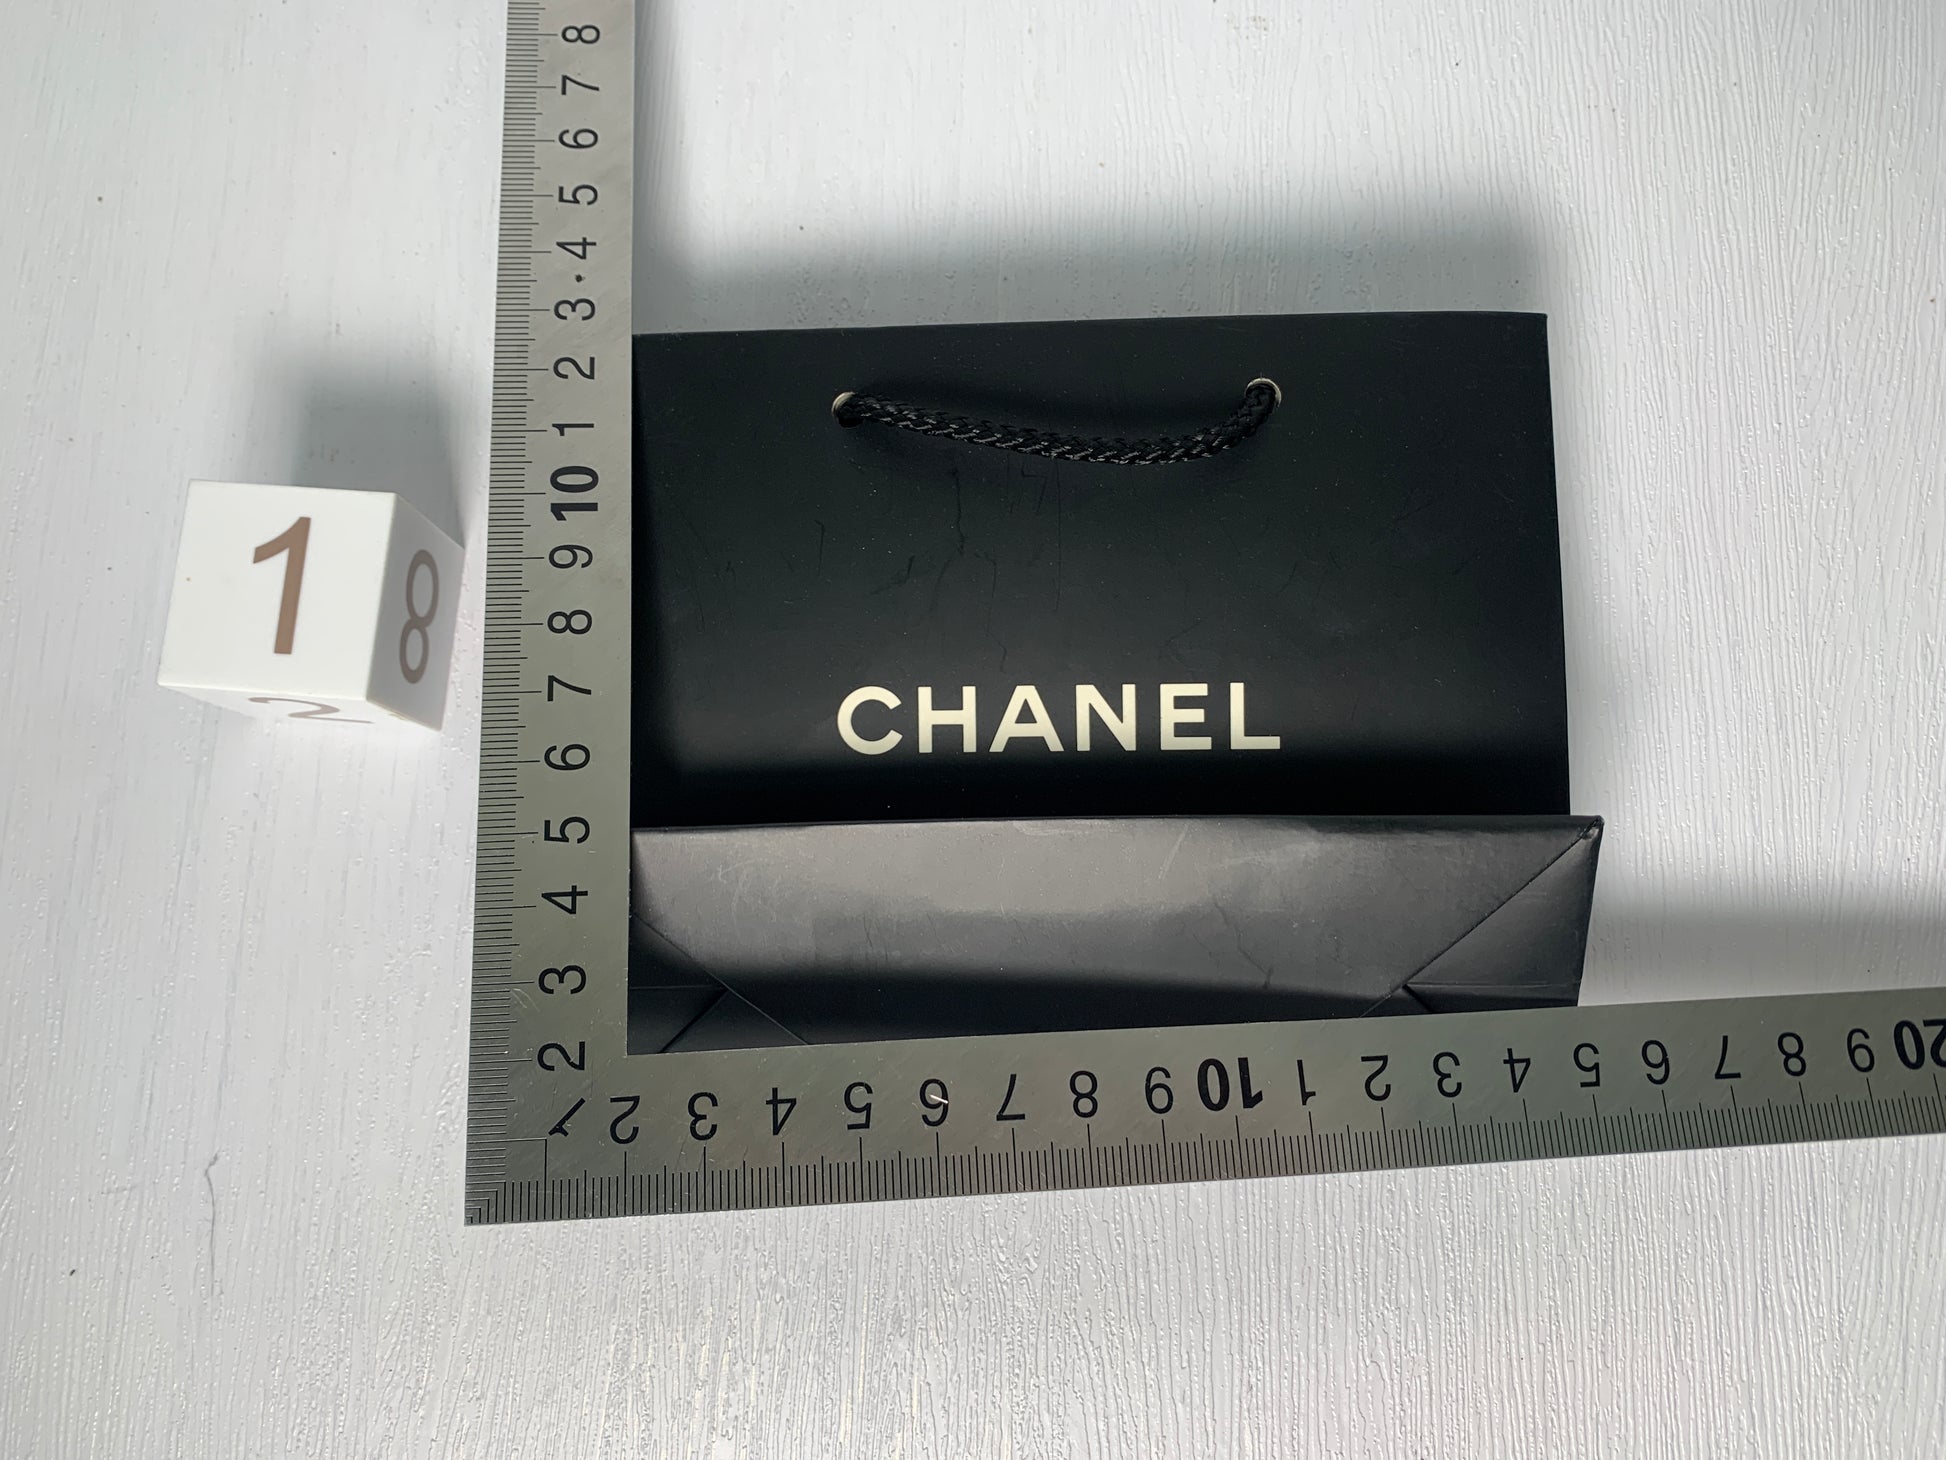 Luxury Brand Shopping Gift Paper Bag Set Chanel Dior Gucci Cartier etc 14135